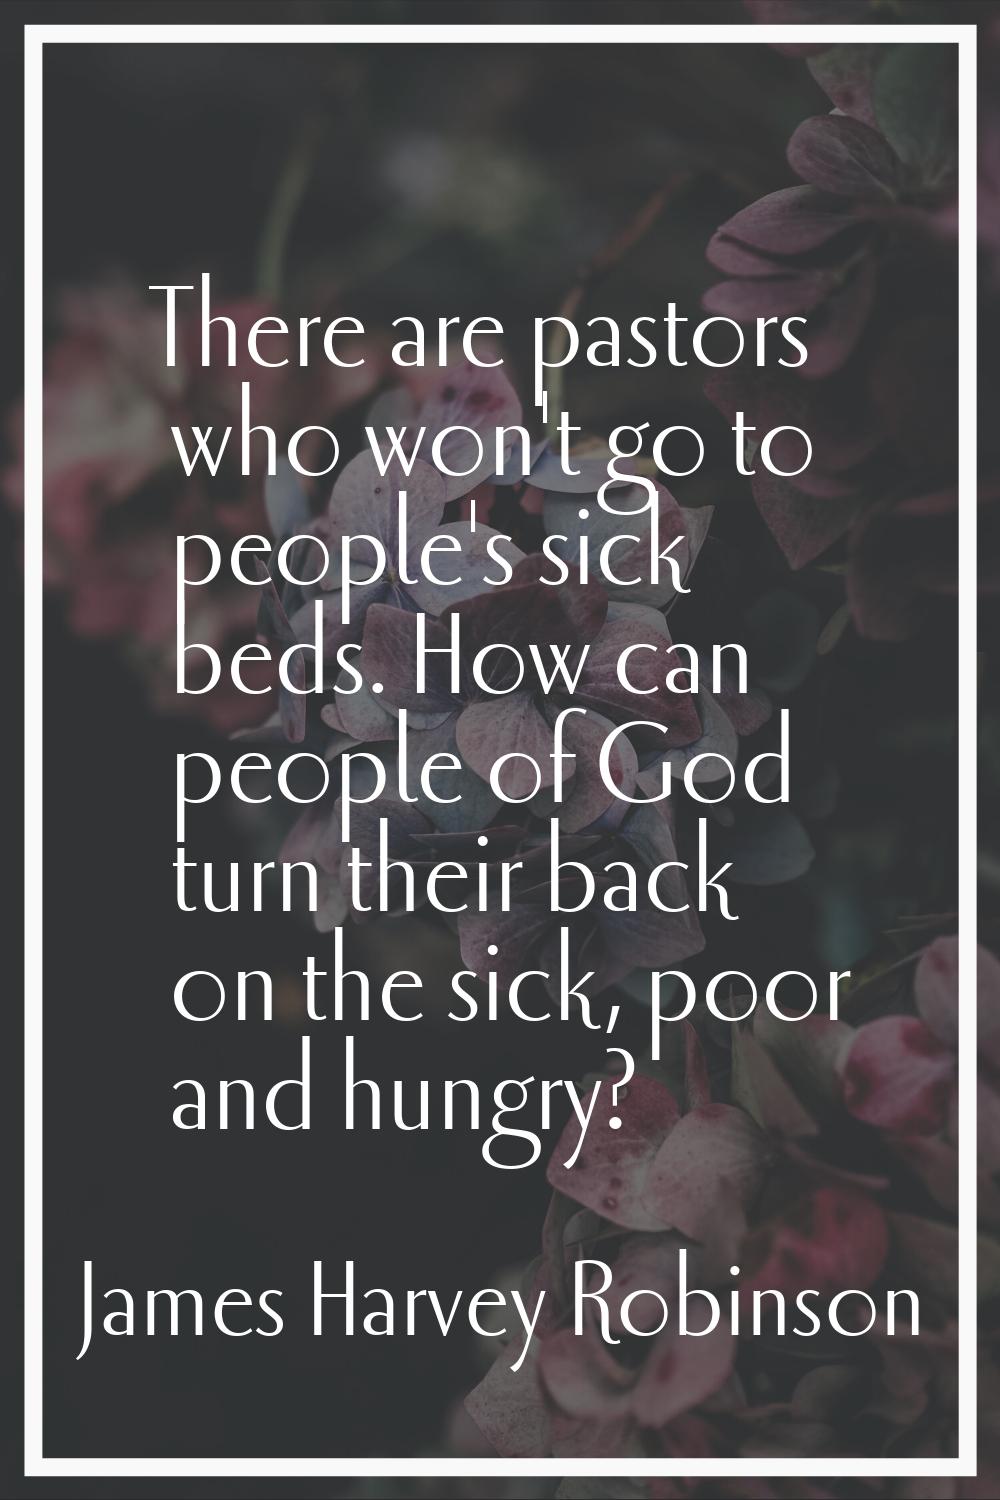 There are pastors who won't go to people's sick beds. How can people of God turn their back on the 